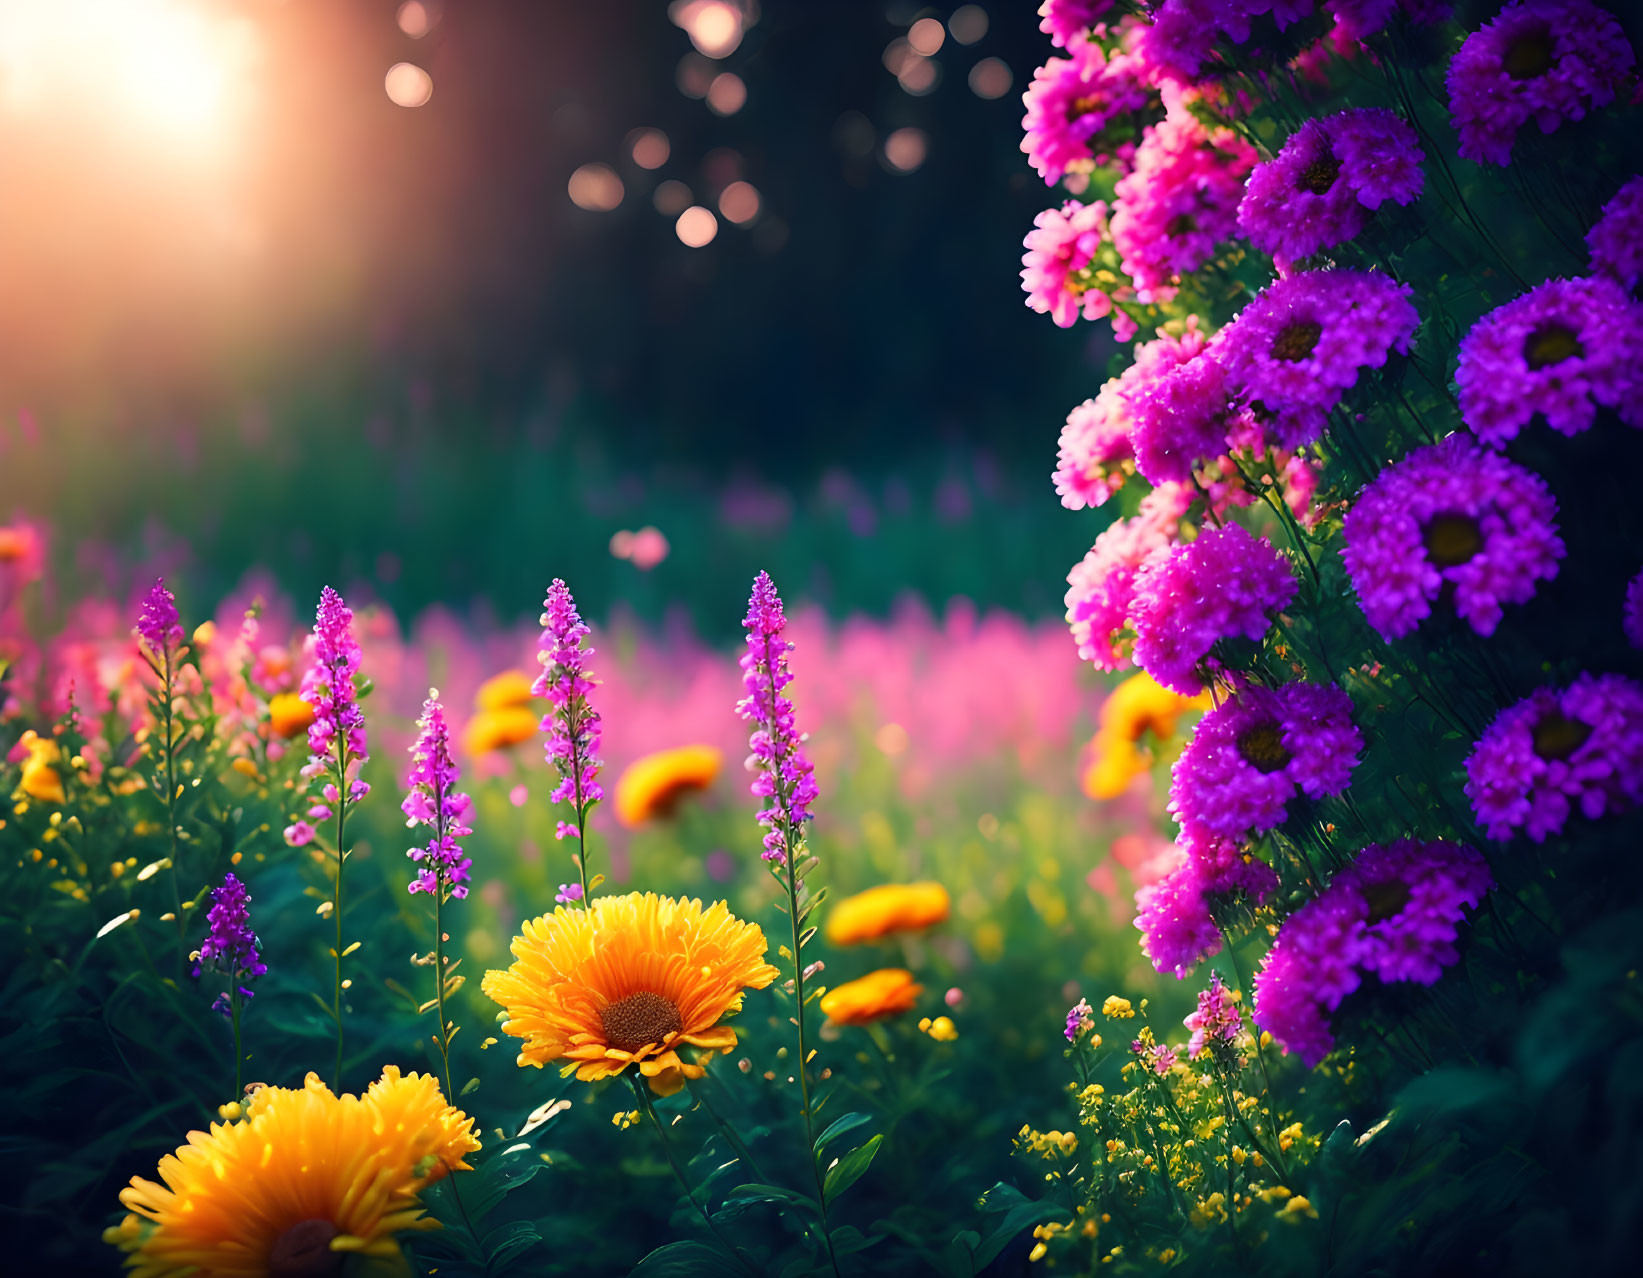 Vibrant Purple and Yellow Flowers in Golden Sunset Light